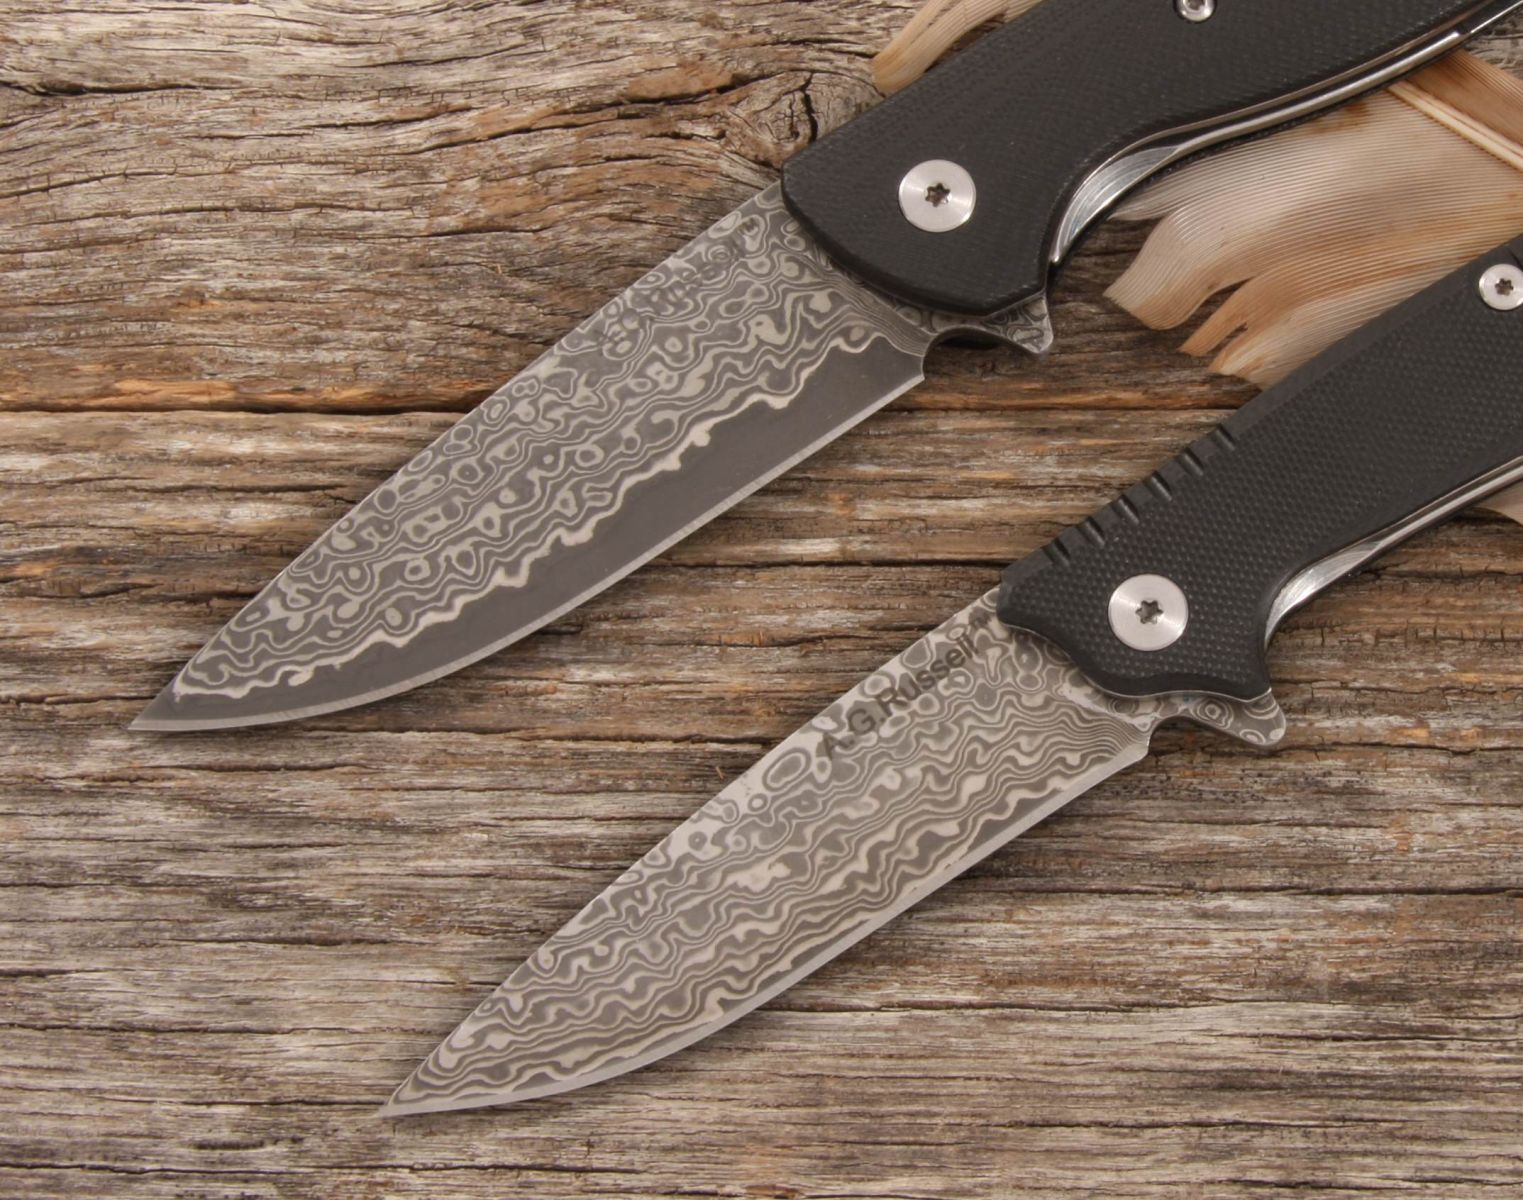 https://agrussell.com/files/content/image/Powerball-Folders%20both%20Close%20up%20of%20Damascus%20blades%20AGLL-C35D10%20(2).jpg